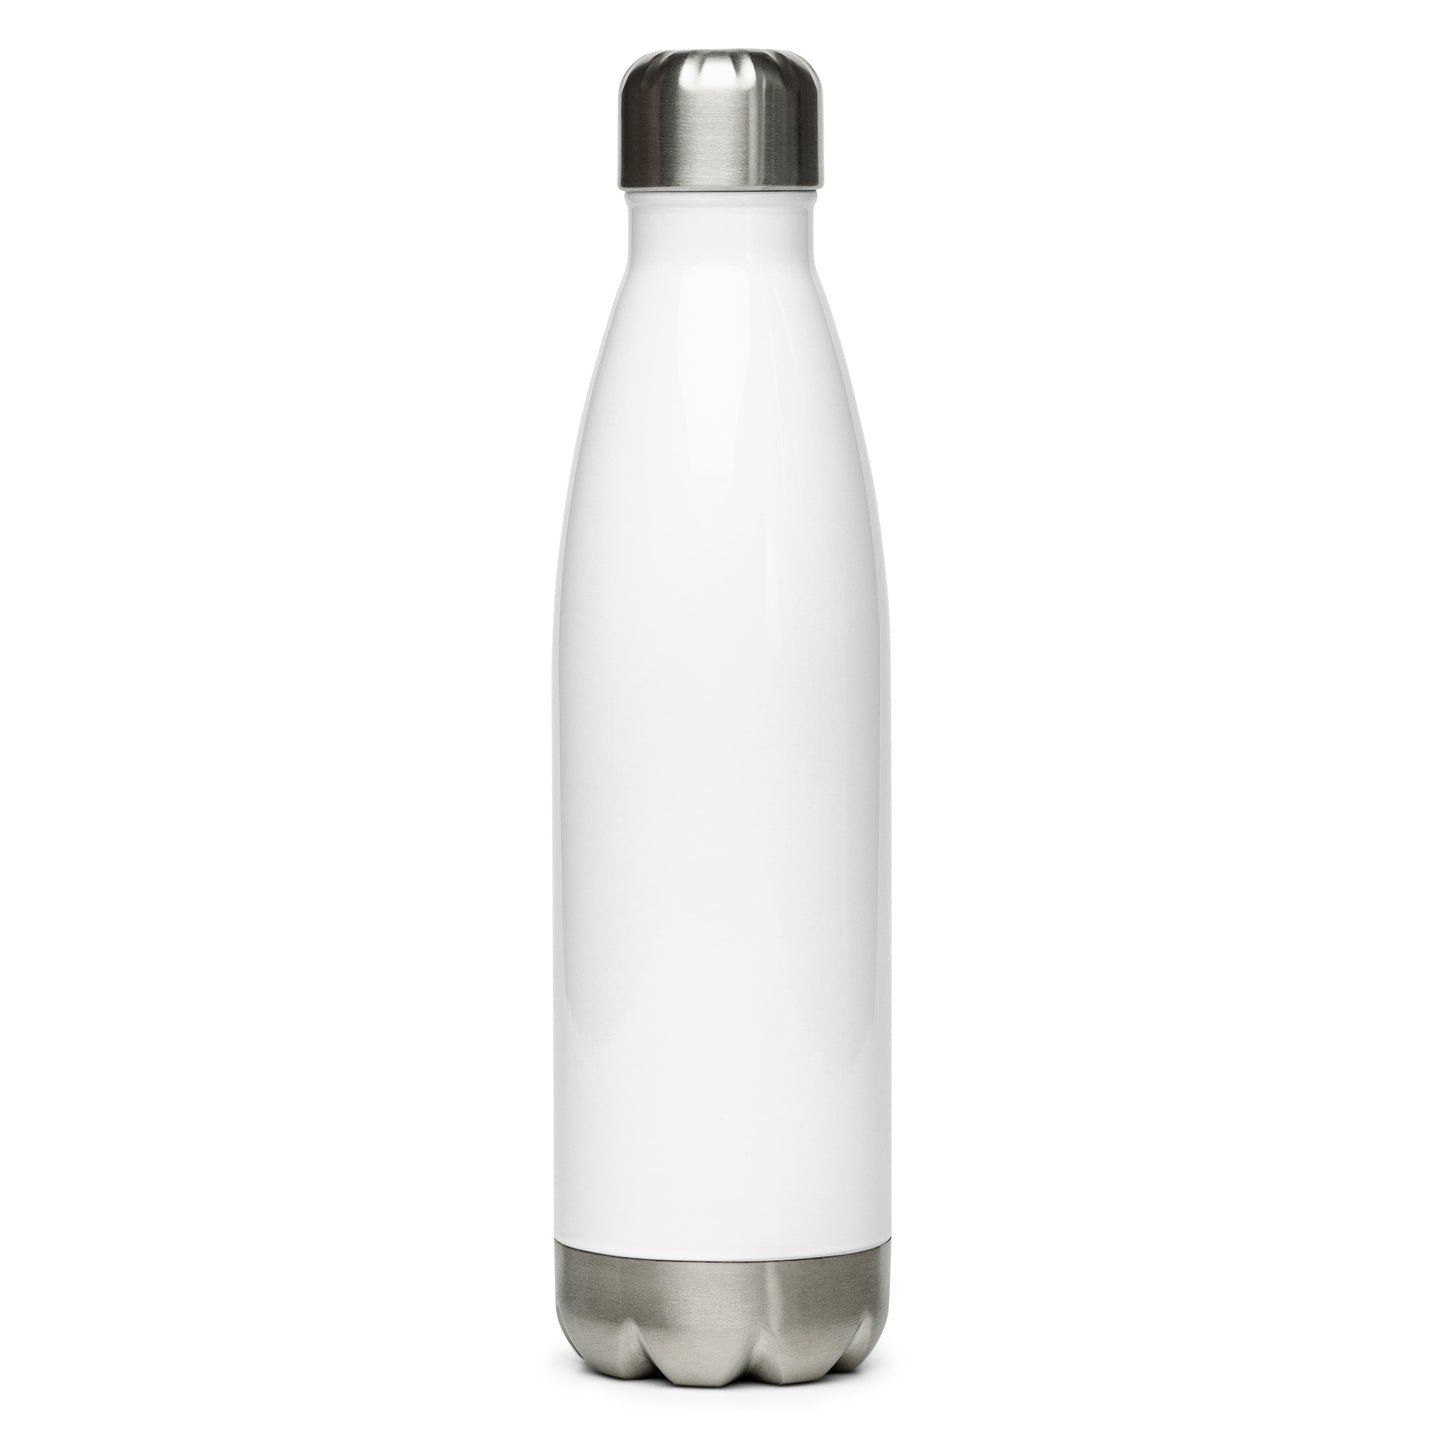 The Sideline Project Stainless Steel Water Bottle